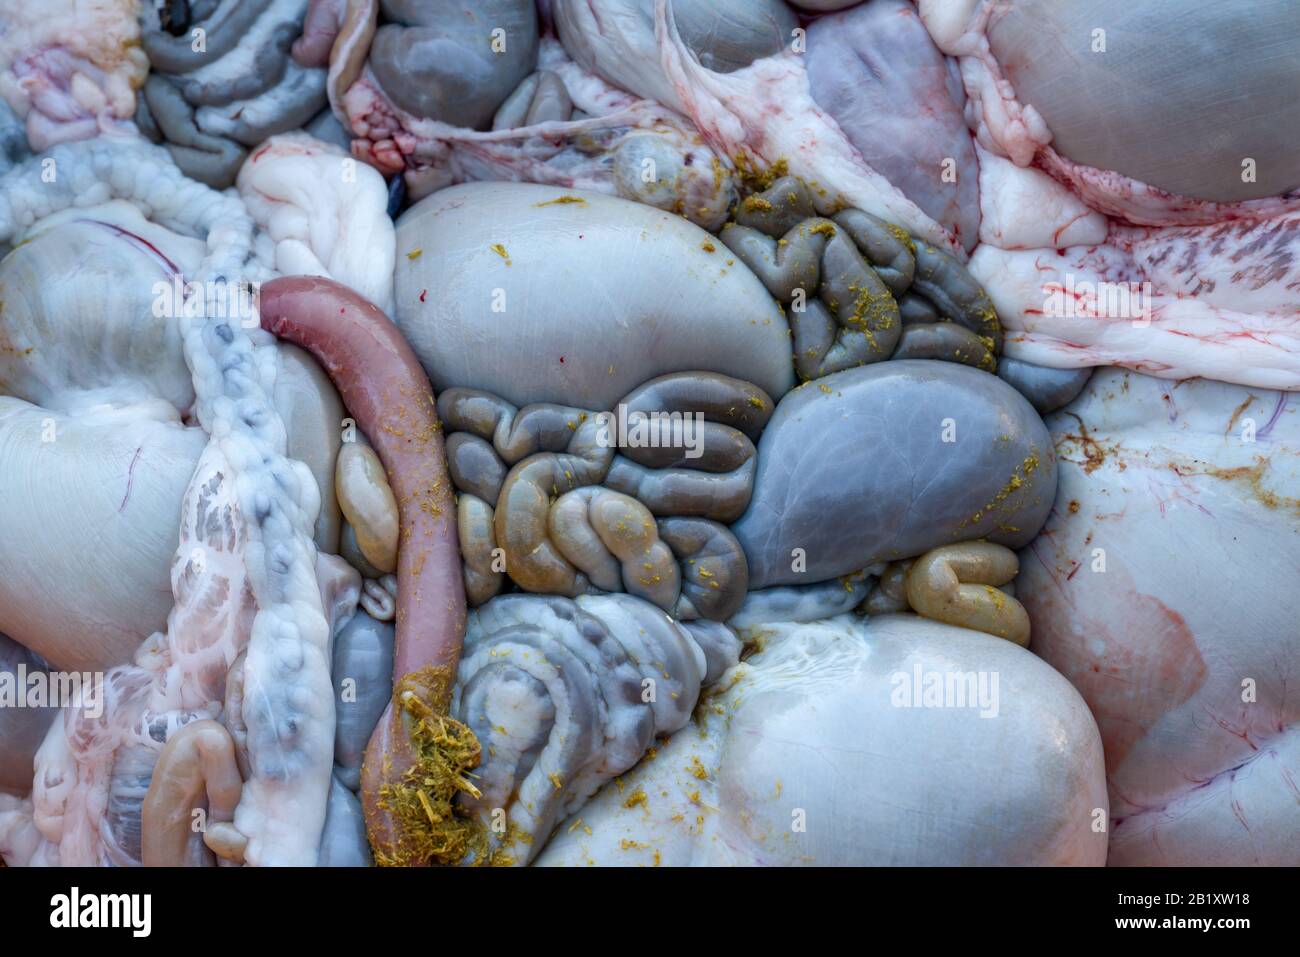 Dirty intestines and stomach just after slaughtering in a slaughterhouse. Stock Photo